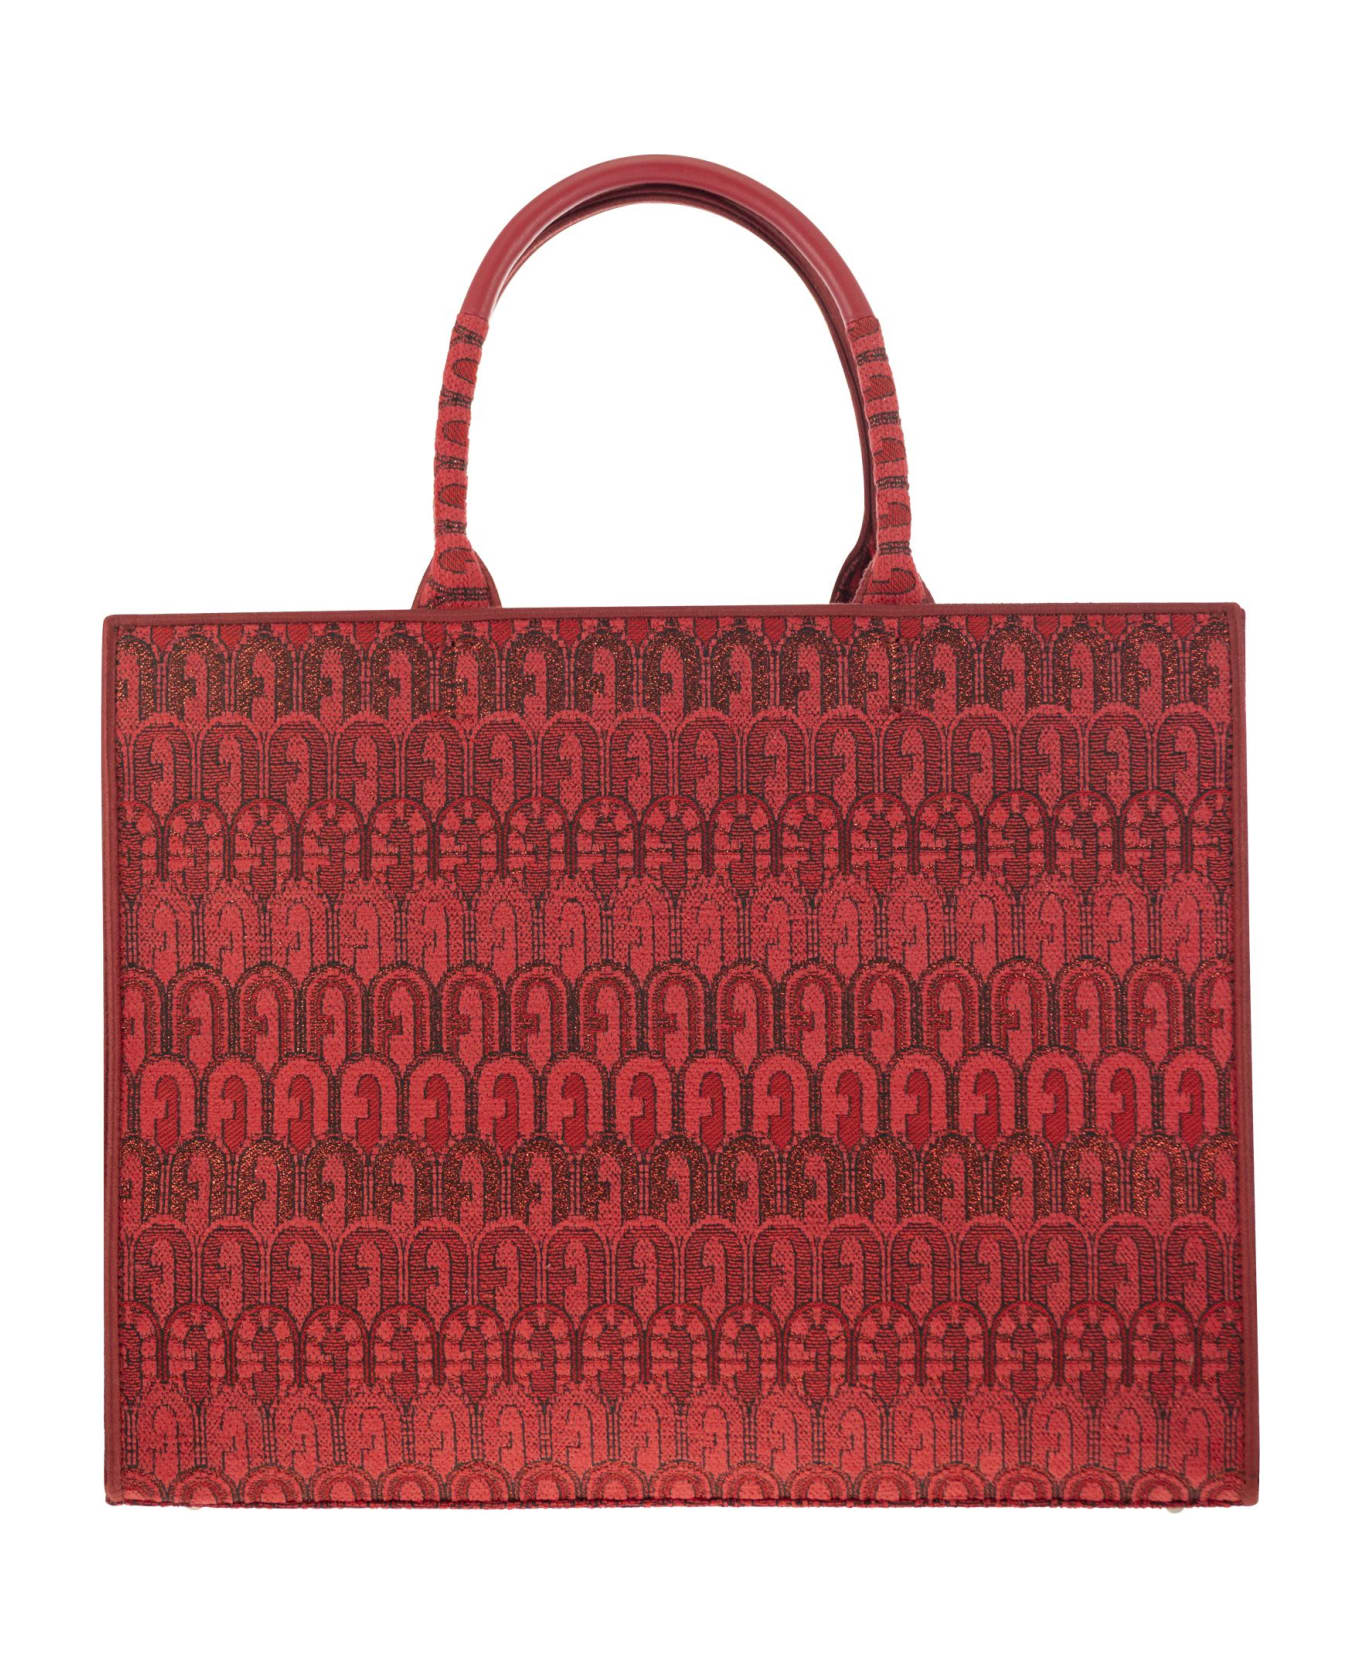 Furla Opportunity - Tote Bag - Toni Rosso トートバッグ